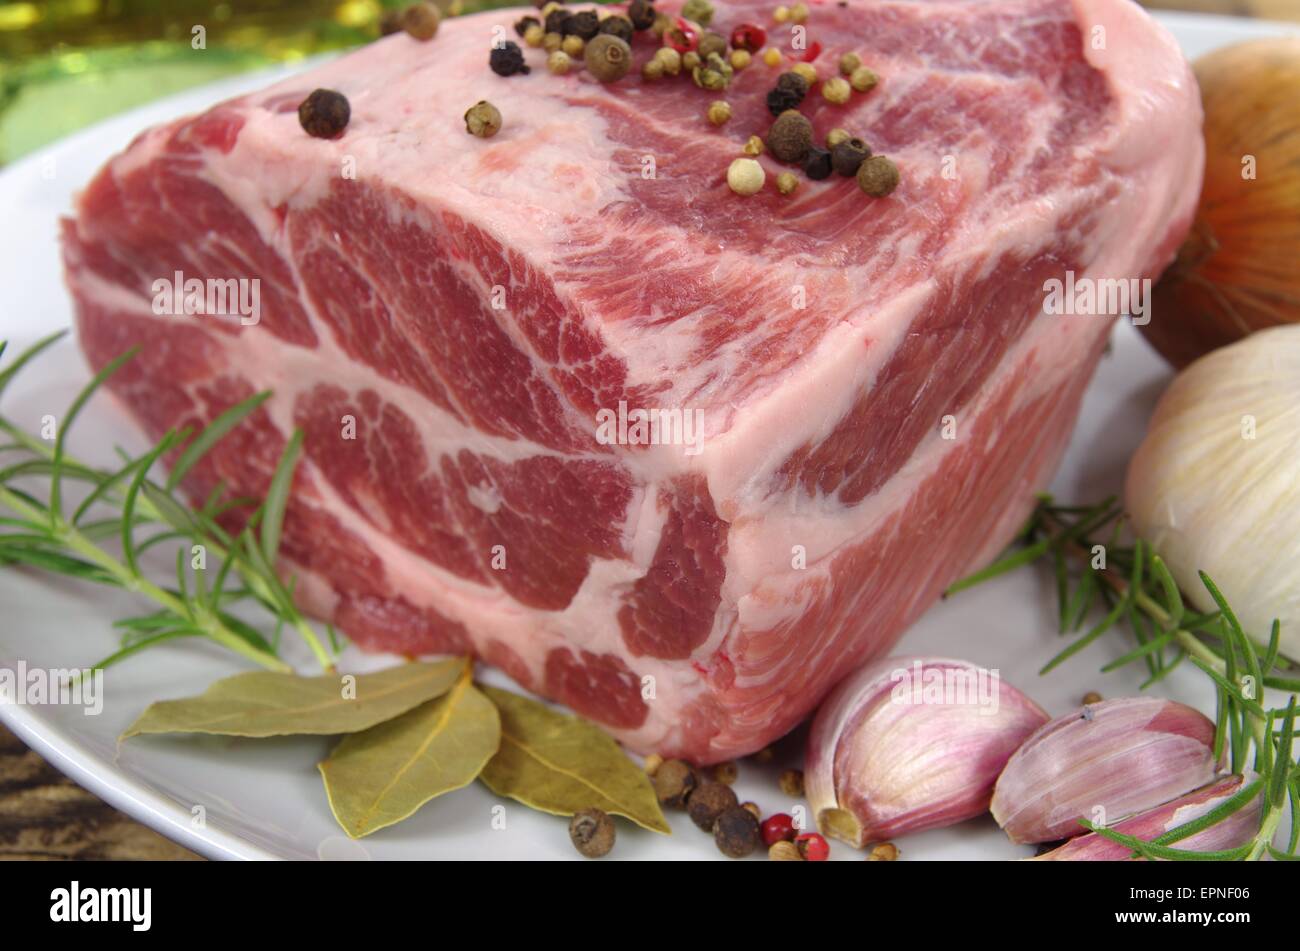 neck with rosemary and basil on white plate Stock Photo